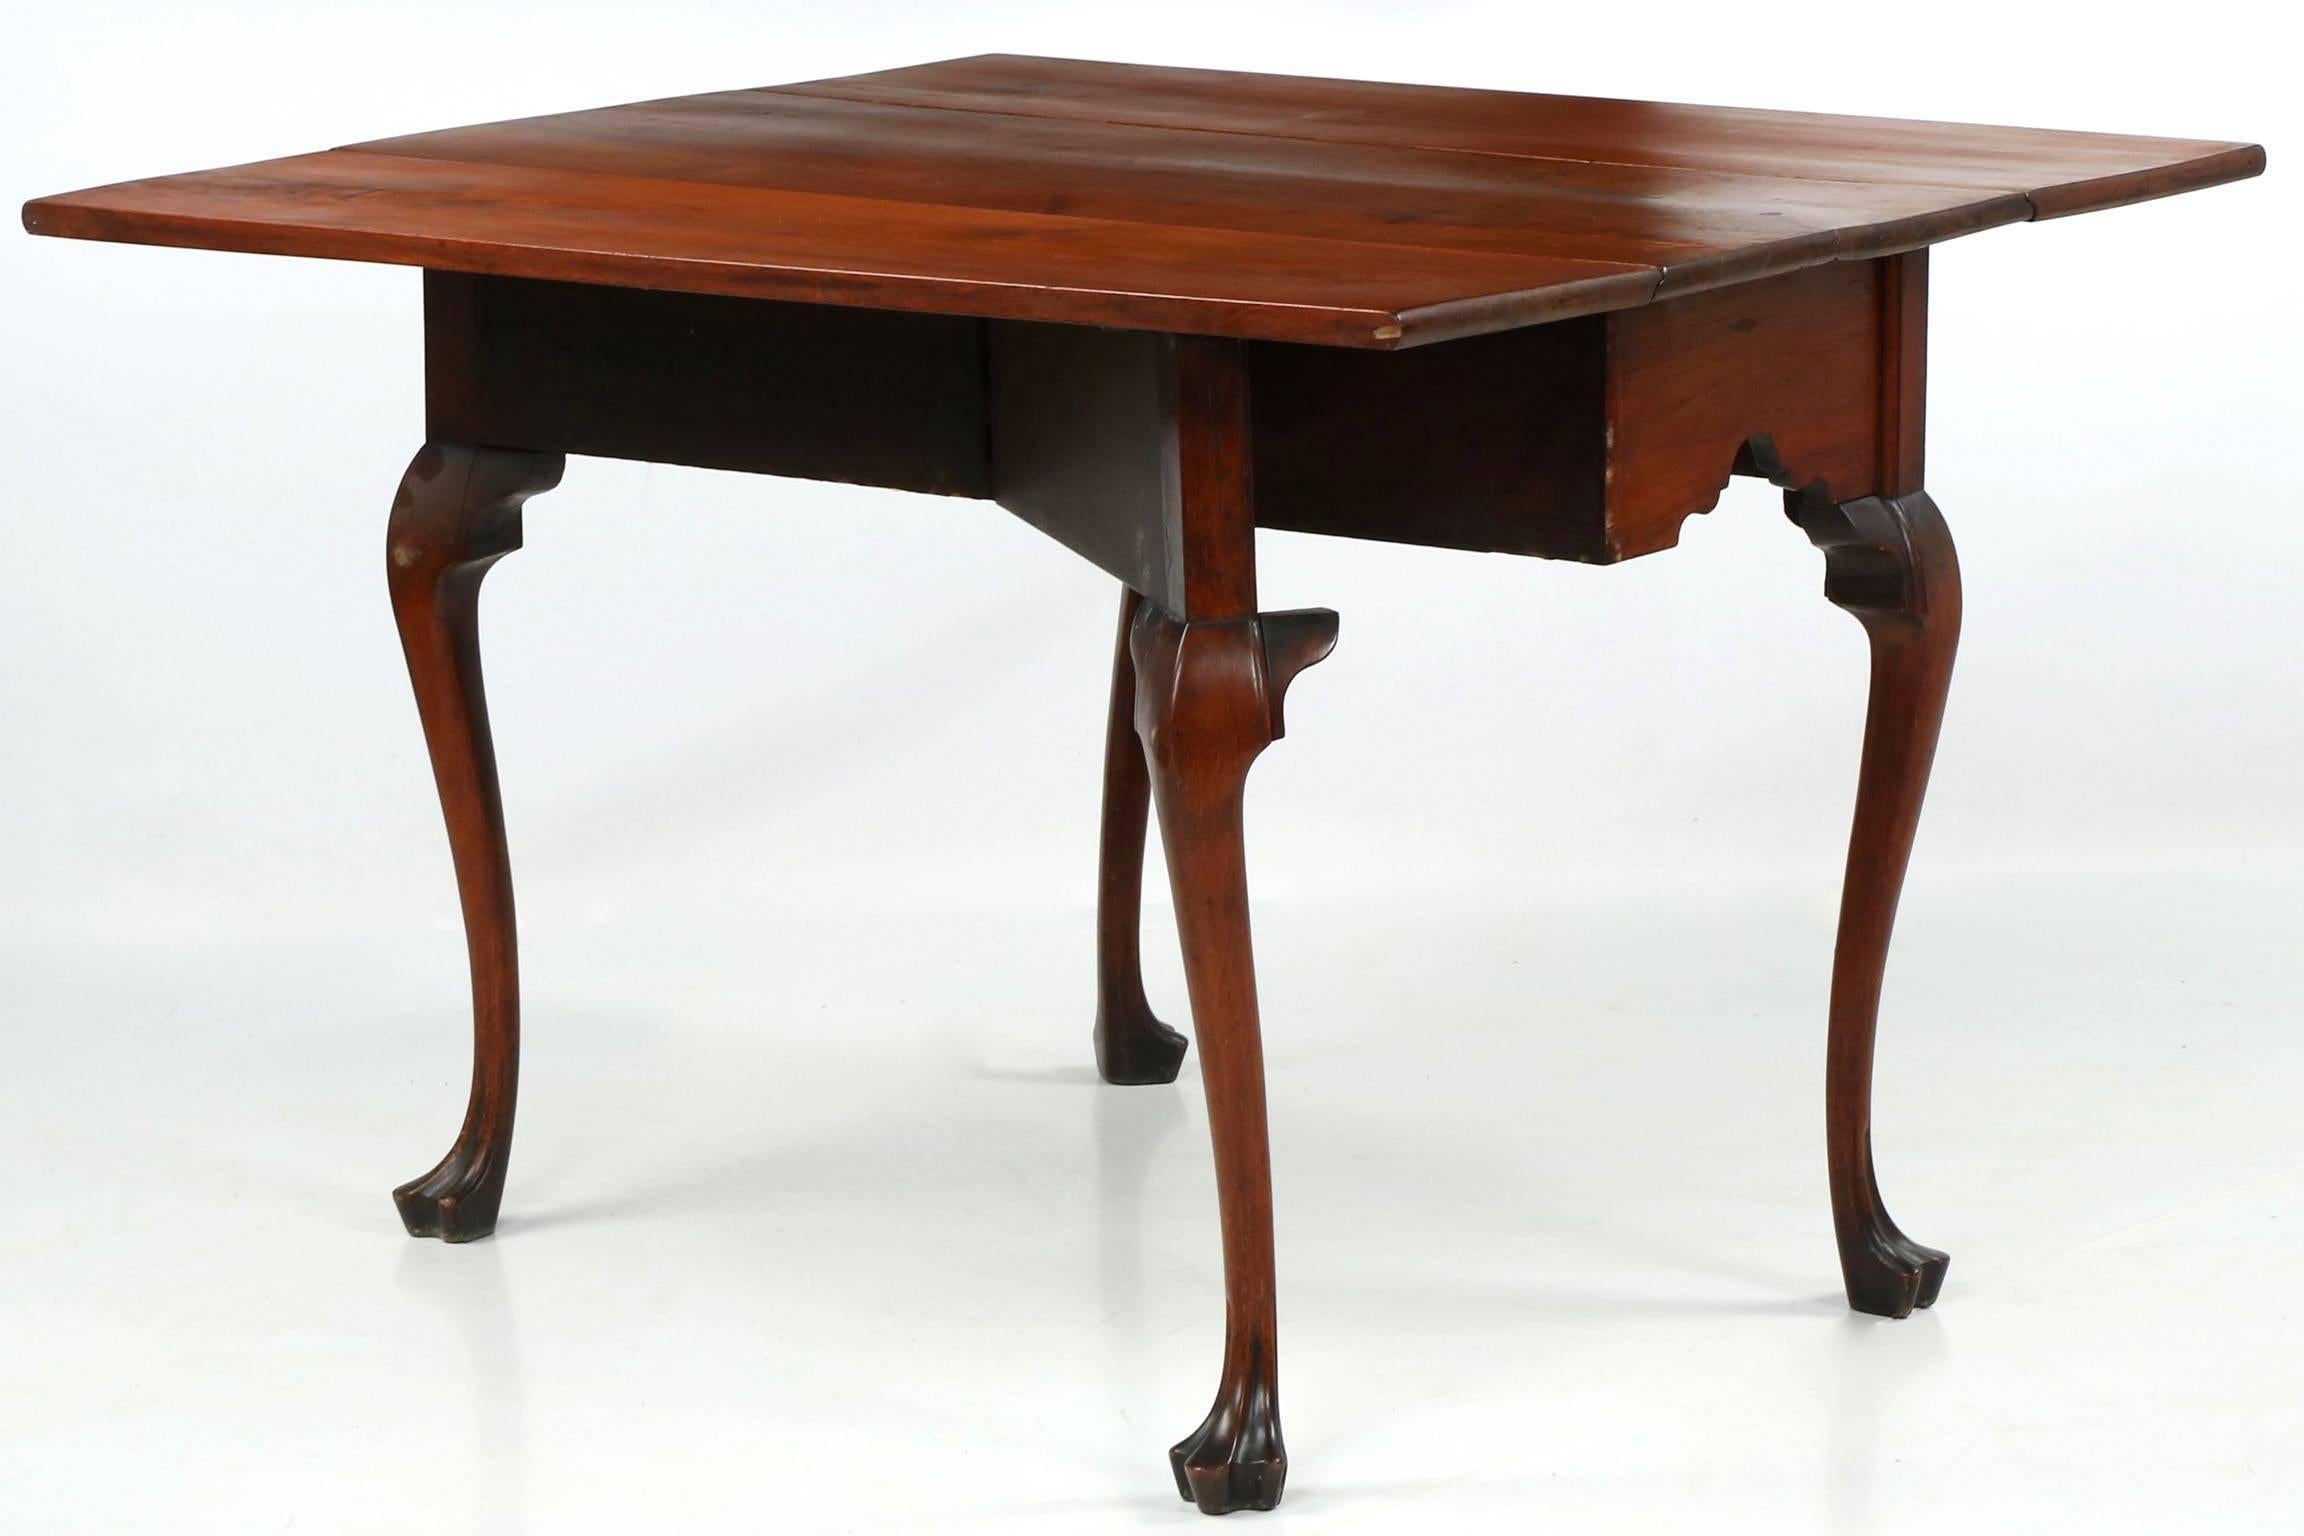 This pure and incredibly beautiful wslnut drop-leaf table is a rare and cherished treasure - clearly owned by a family that cared for it, the table remains in pristine condition with a very early refinish that has since grown a deep and lovely